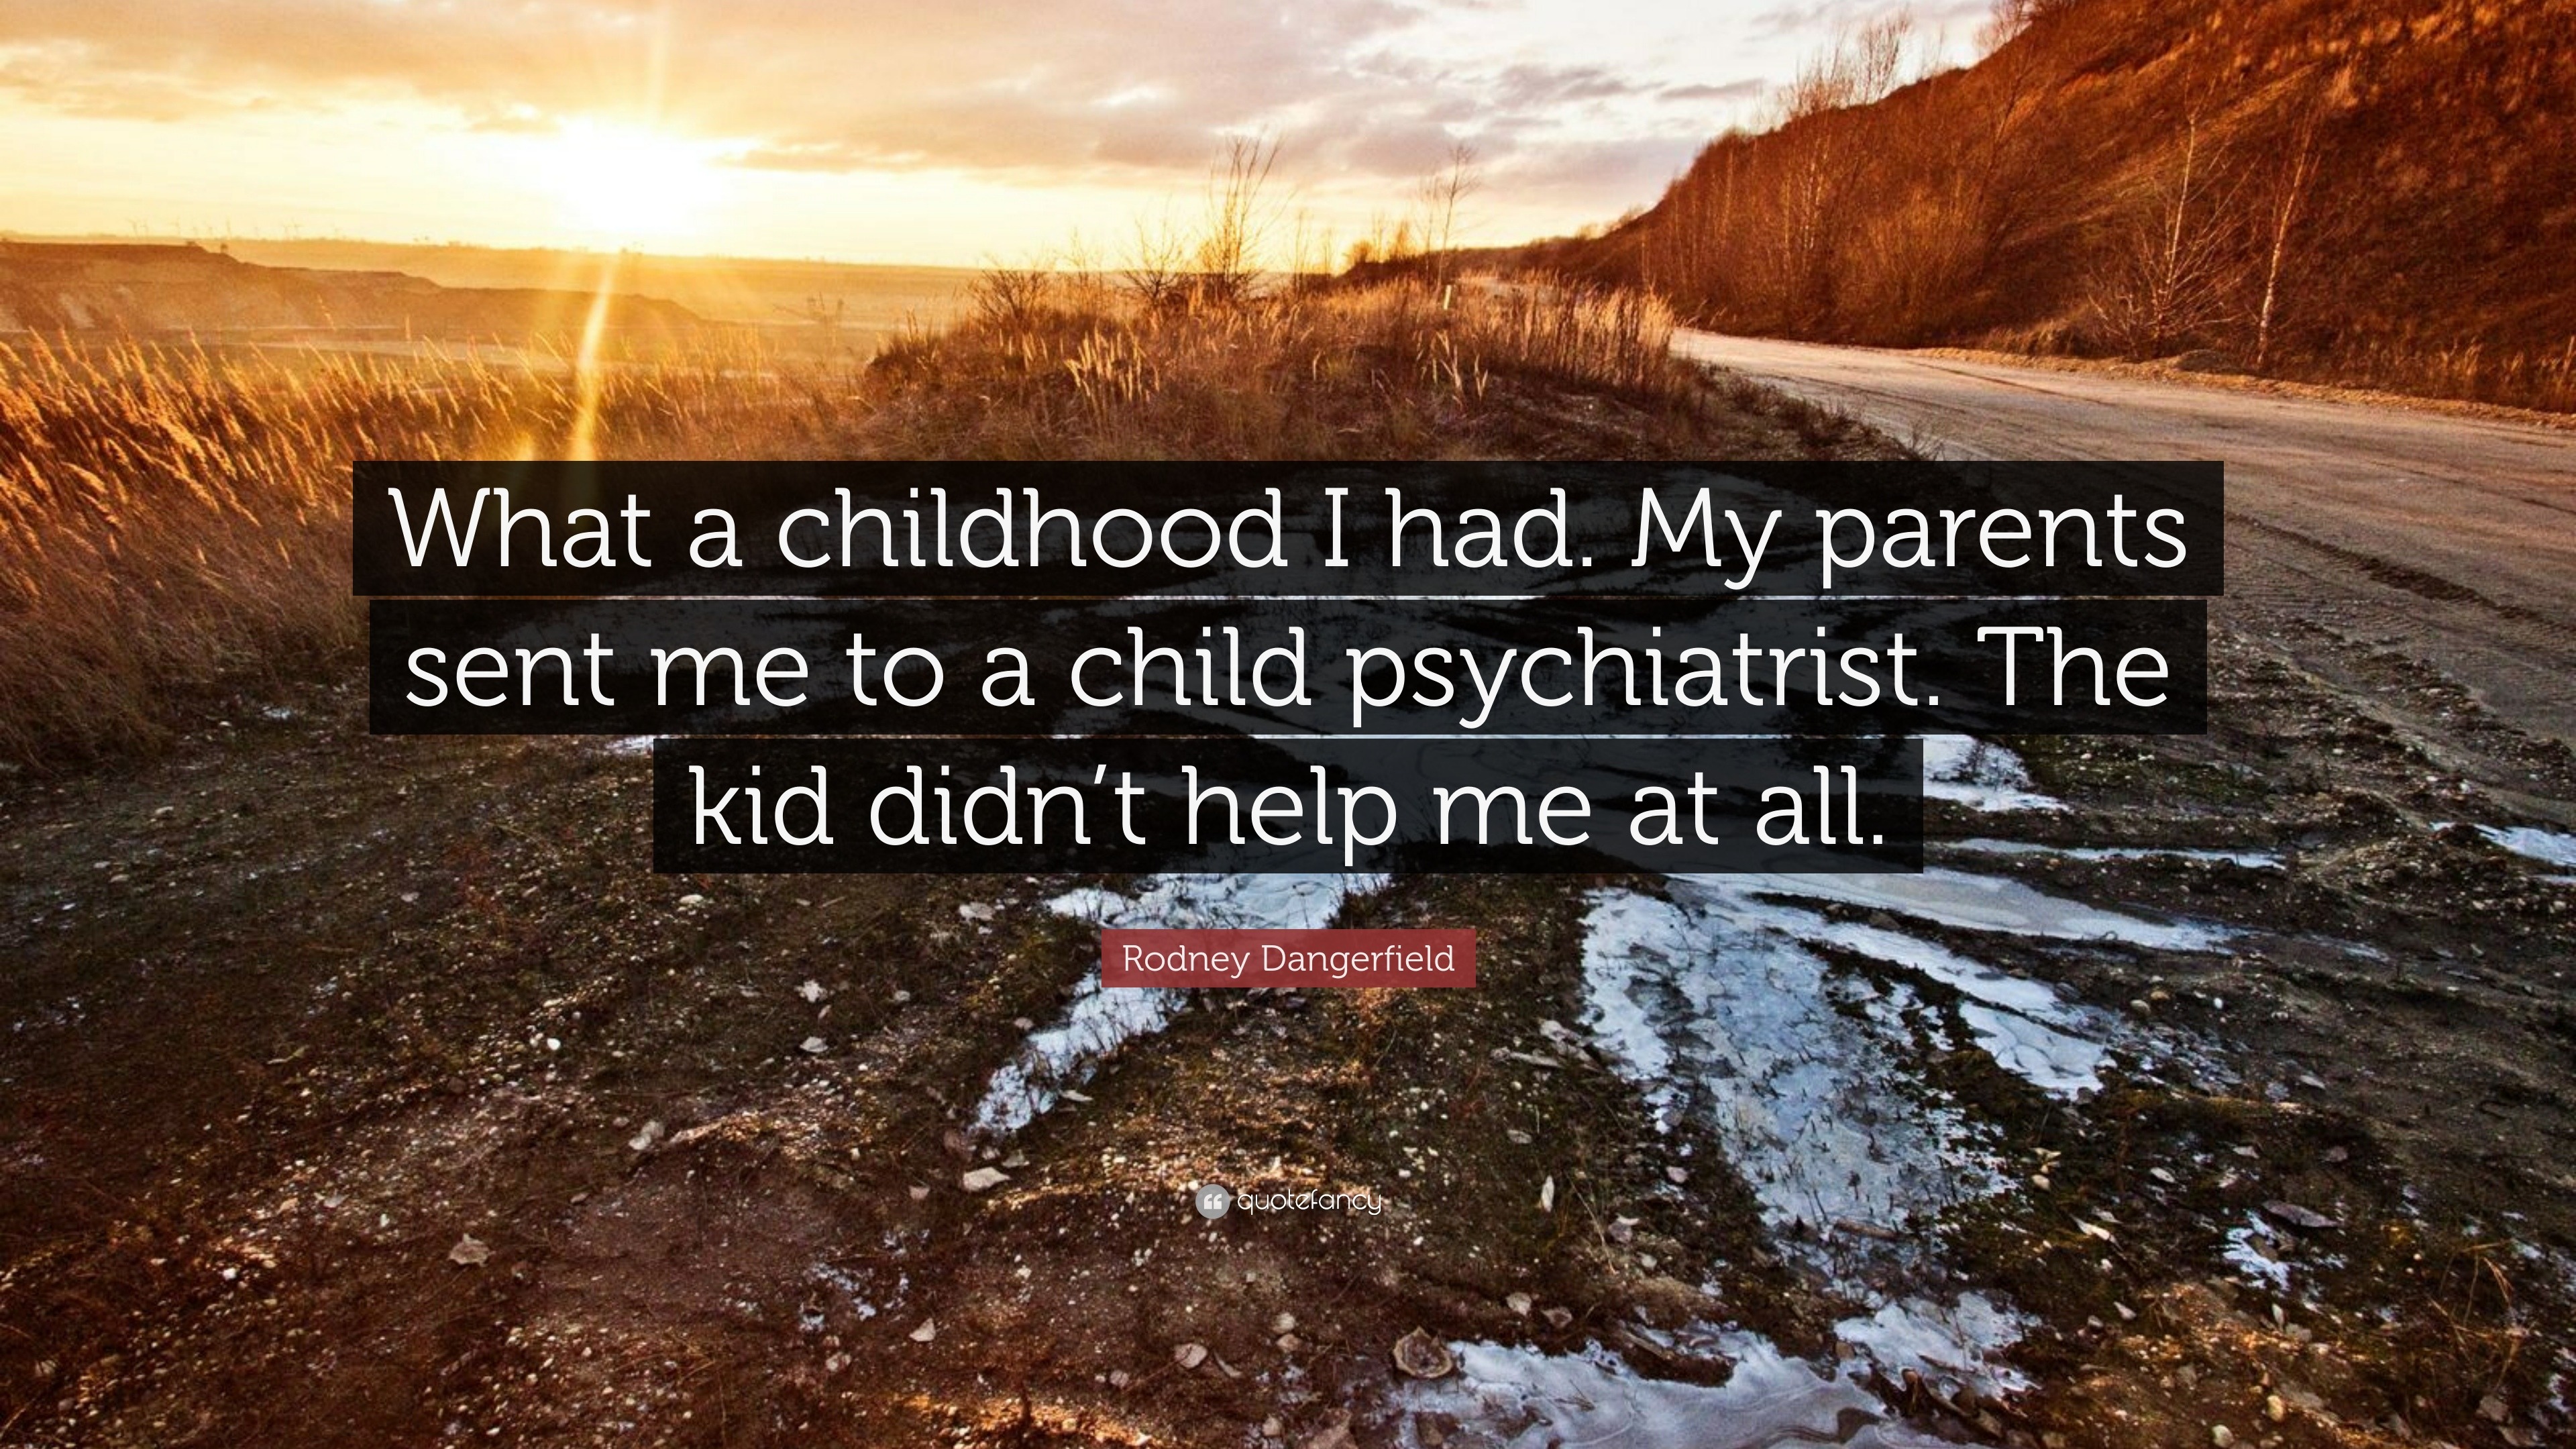 Rodney Dangerfield Quote: “What a childhood I had, why, when I